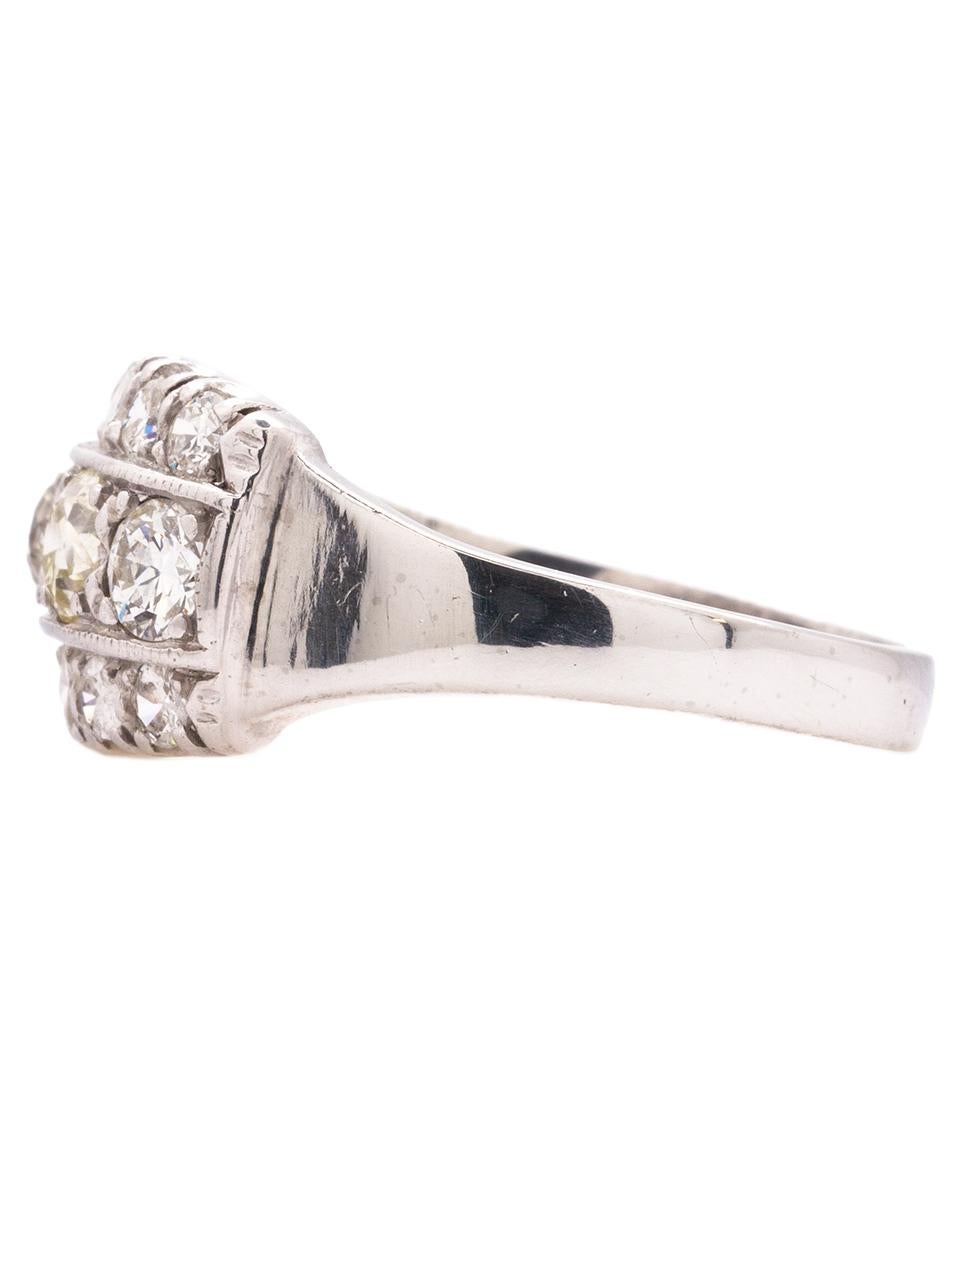 Antique platinum diamond band set with three rows of white & shining old European cut diamonds, approximately 1.50ct total weight, with color grades ranging from G-L, SI1-I3 clarity. 10mm wide, ring size is 6.75 with ability to adjust. Circa